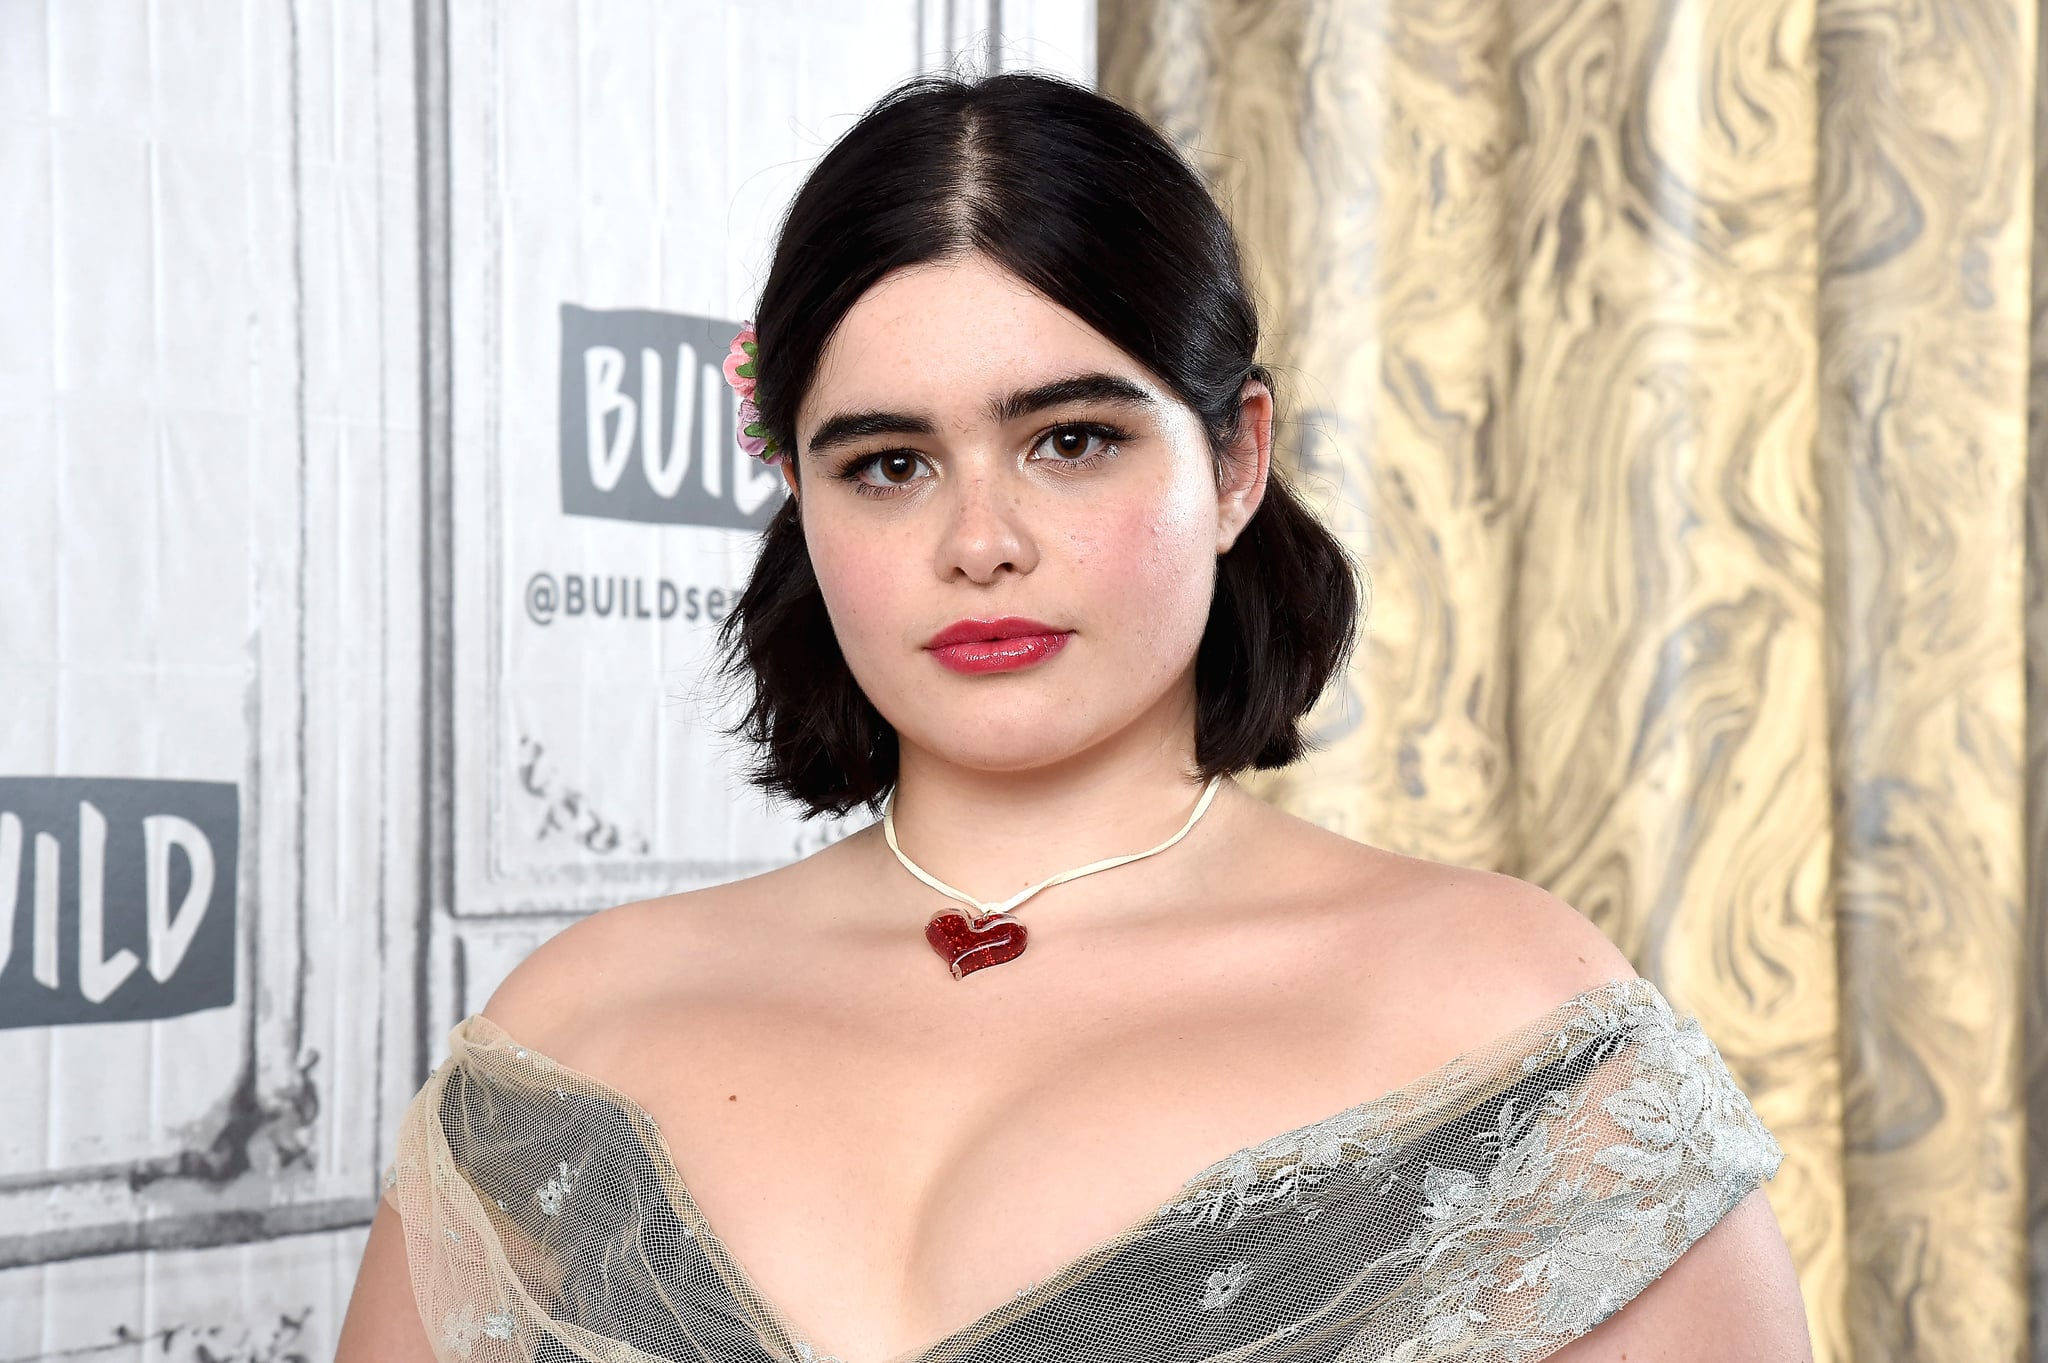 NEW YORK, NEW YORK - JULY 25: Barbie Ferreira at Build Studio on July 25, 2019 in New York City. (Photo by Gary Gershoff/Getty Images)